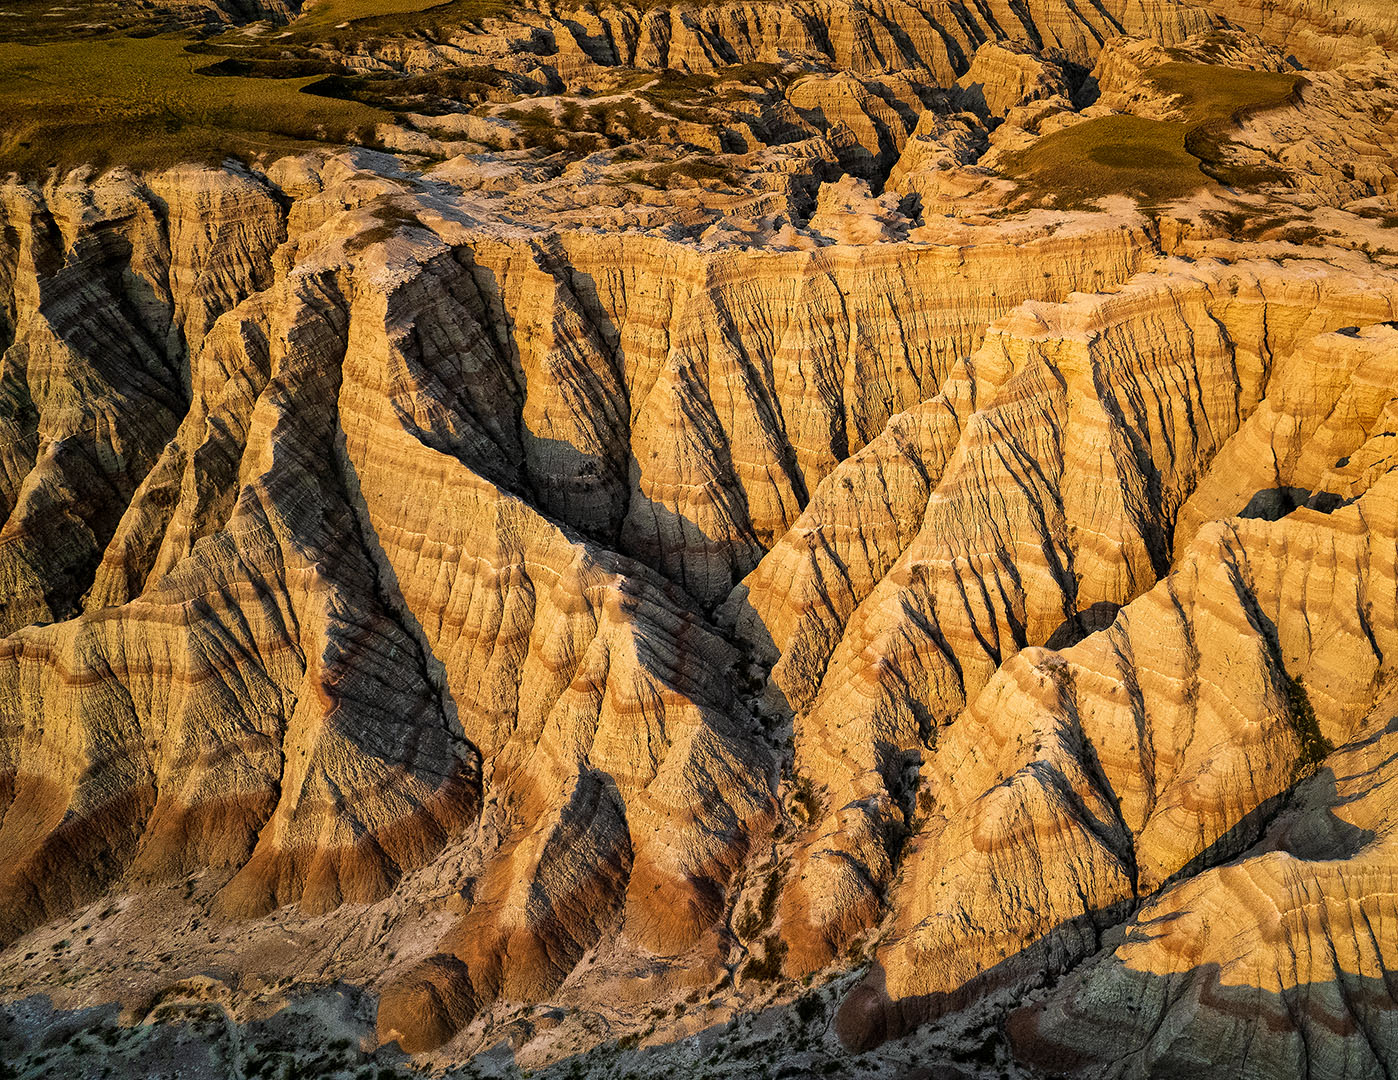 Sunrise in the Badlands by Pete Scifres